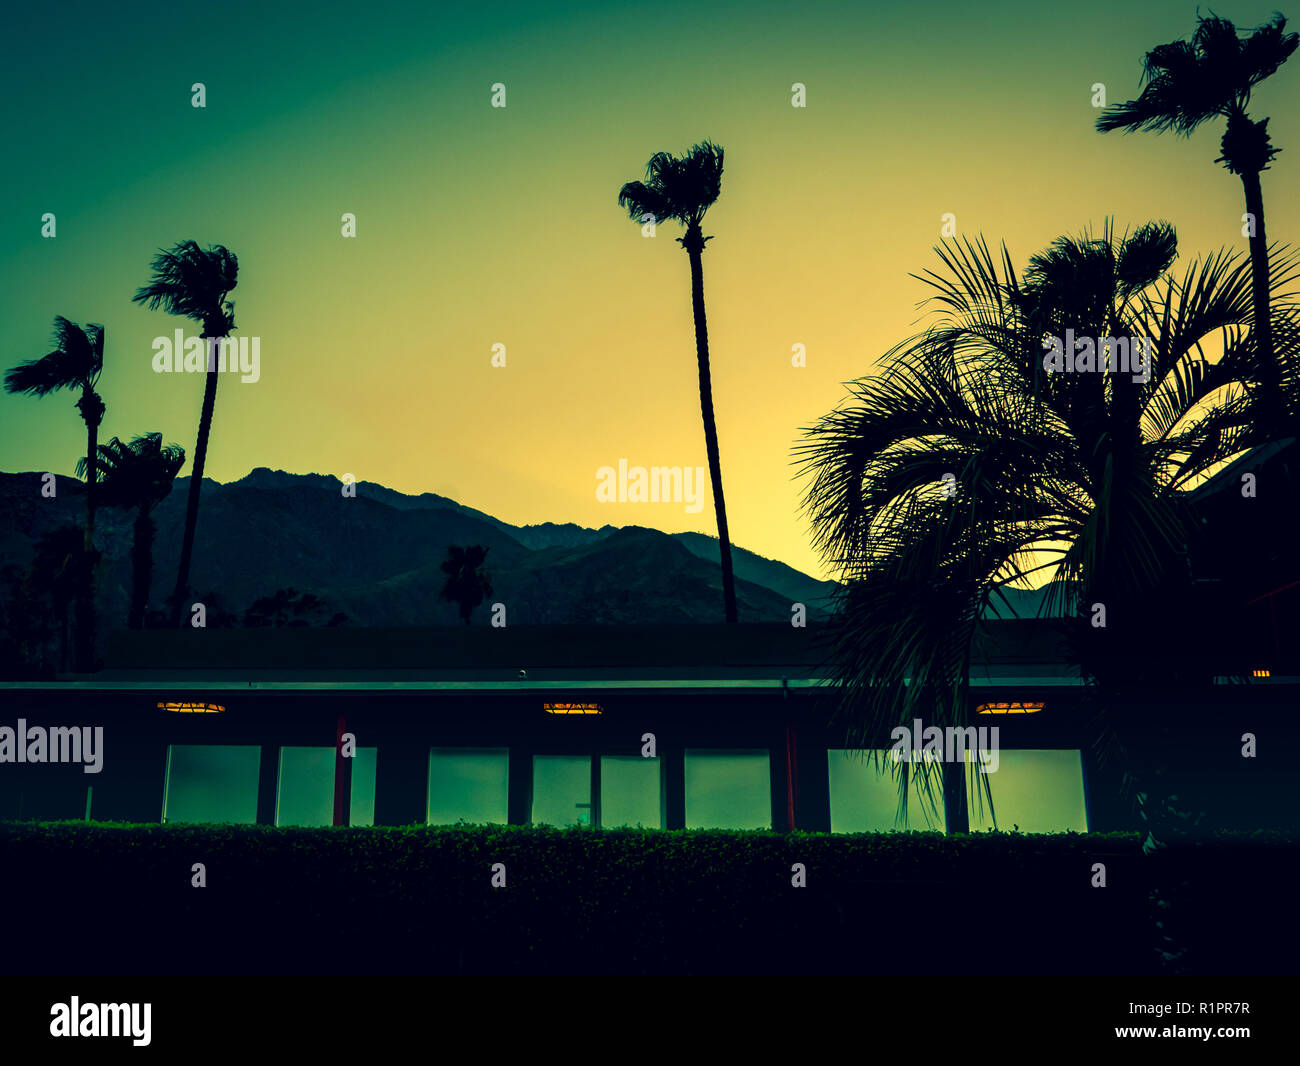 Mountains, Palm Trees and Motel Lights in Palm Springs at Sunset with Copy Space Stock Photo